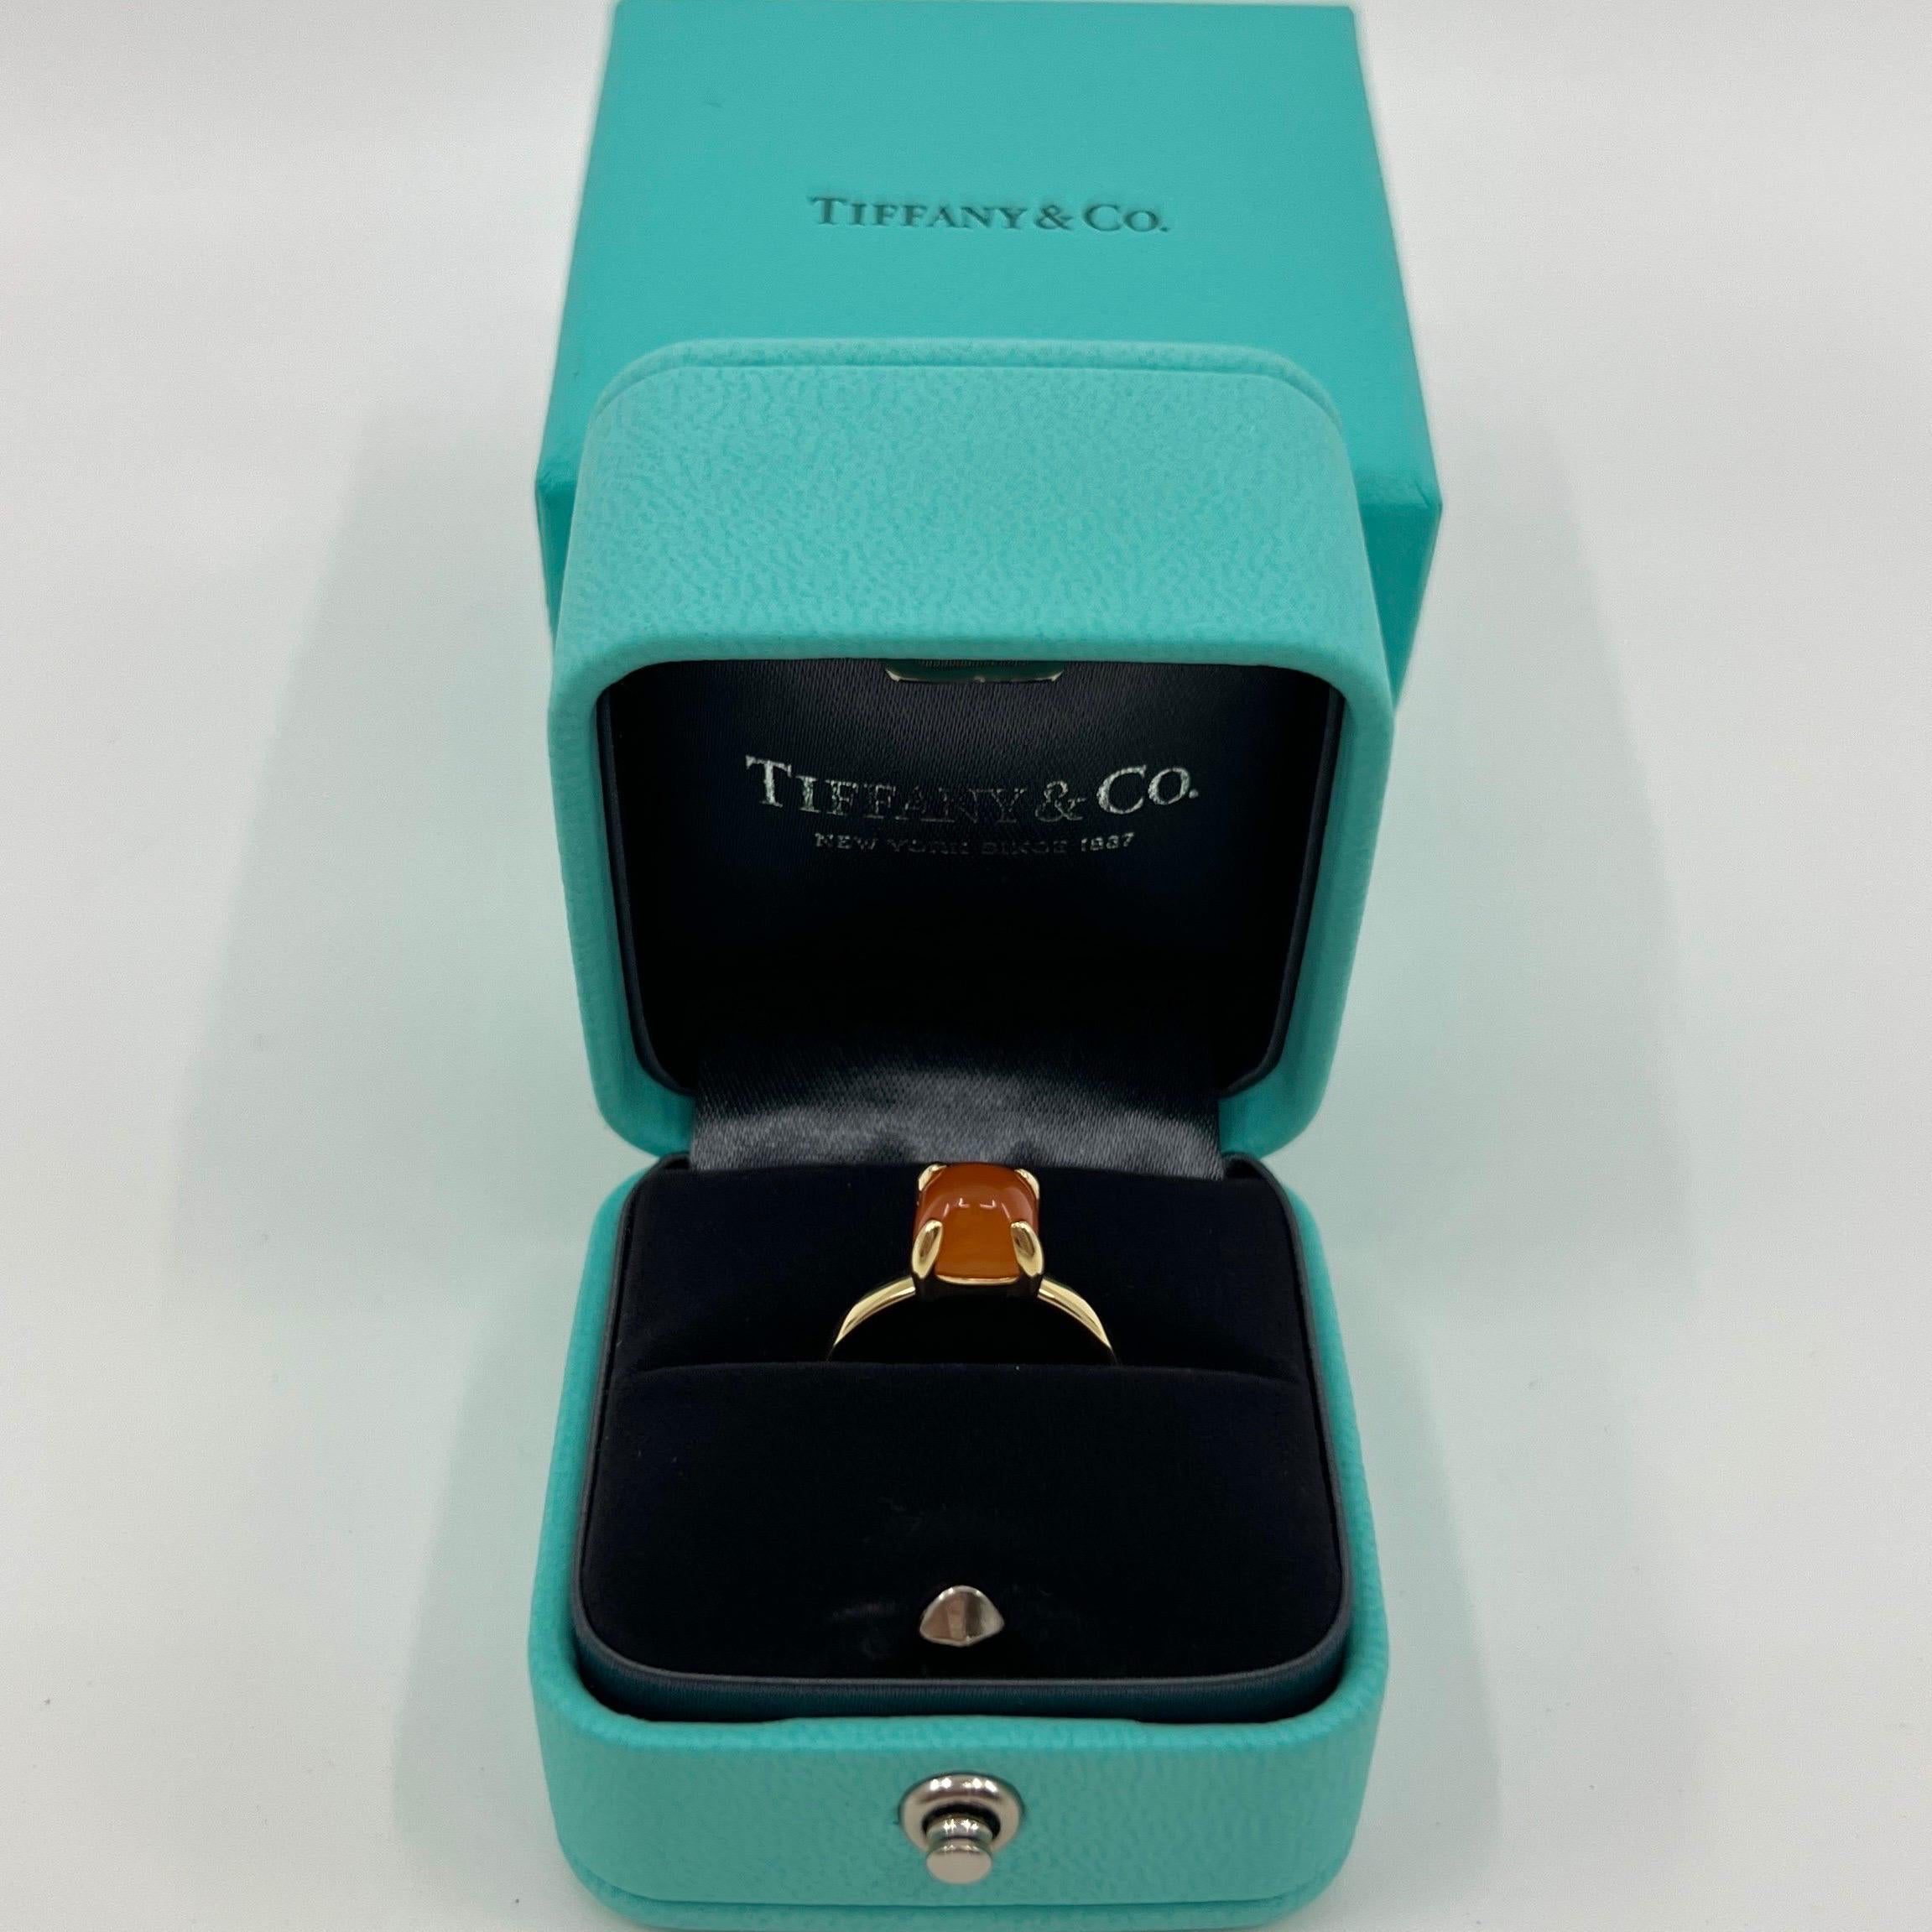 Rare Vintage Tiffany & Co. Paloma Picasso Orange Chalcedony Sugar Stack 18k Yellow Gold Ring.

A beautiful and rare sugarloaf agate chalcedony ring from the Tiffany & Co Paloma Picasso collection.

Fine jewellery houses like Tiffany only use the